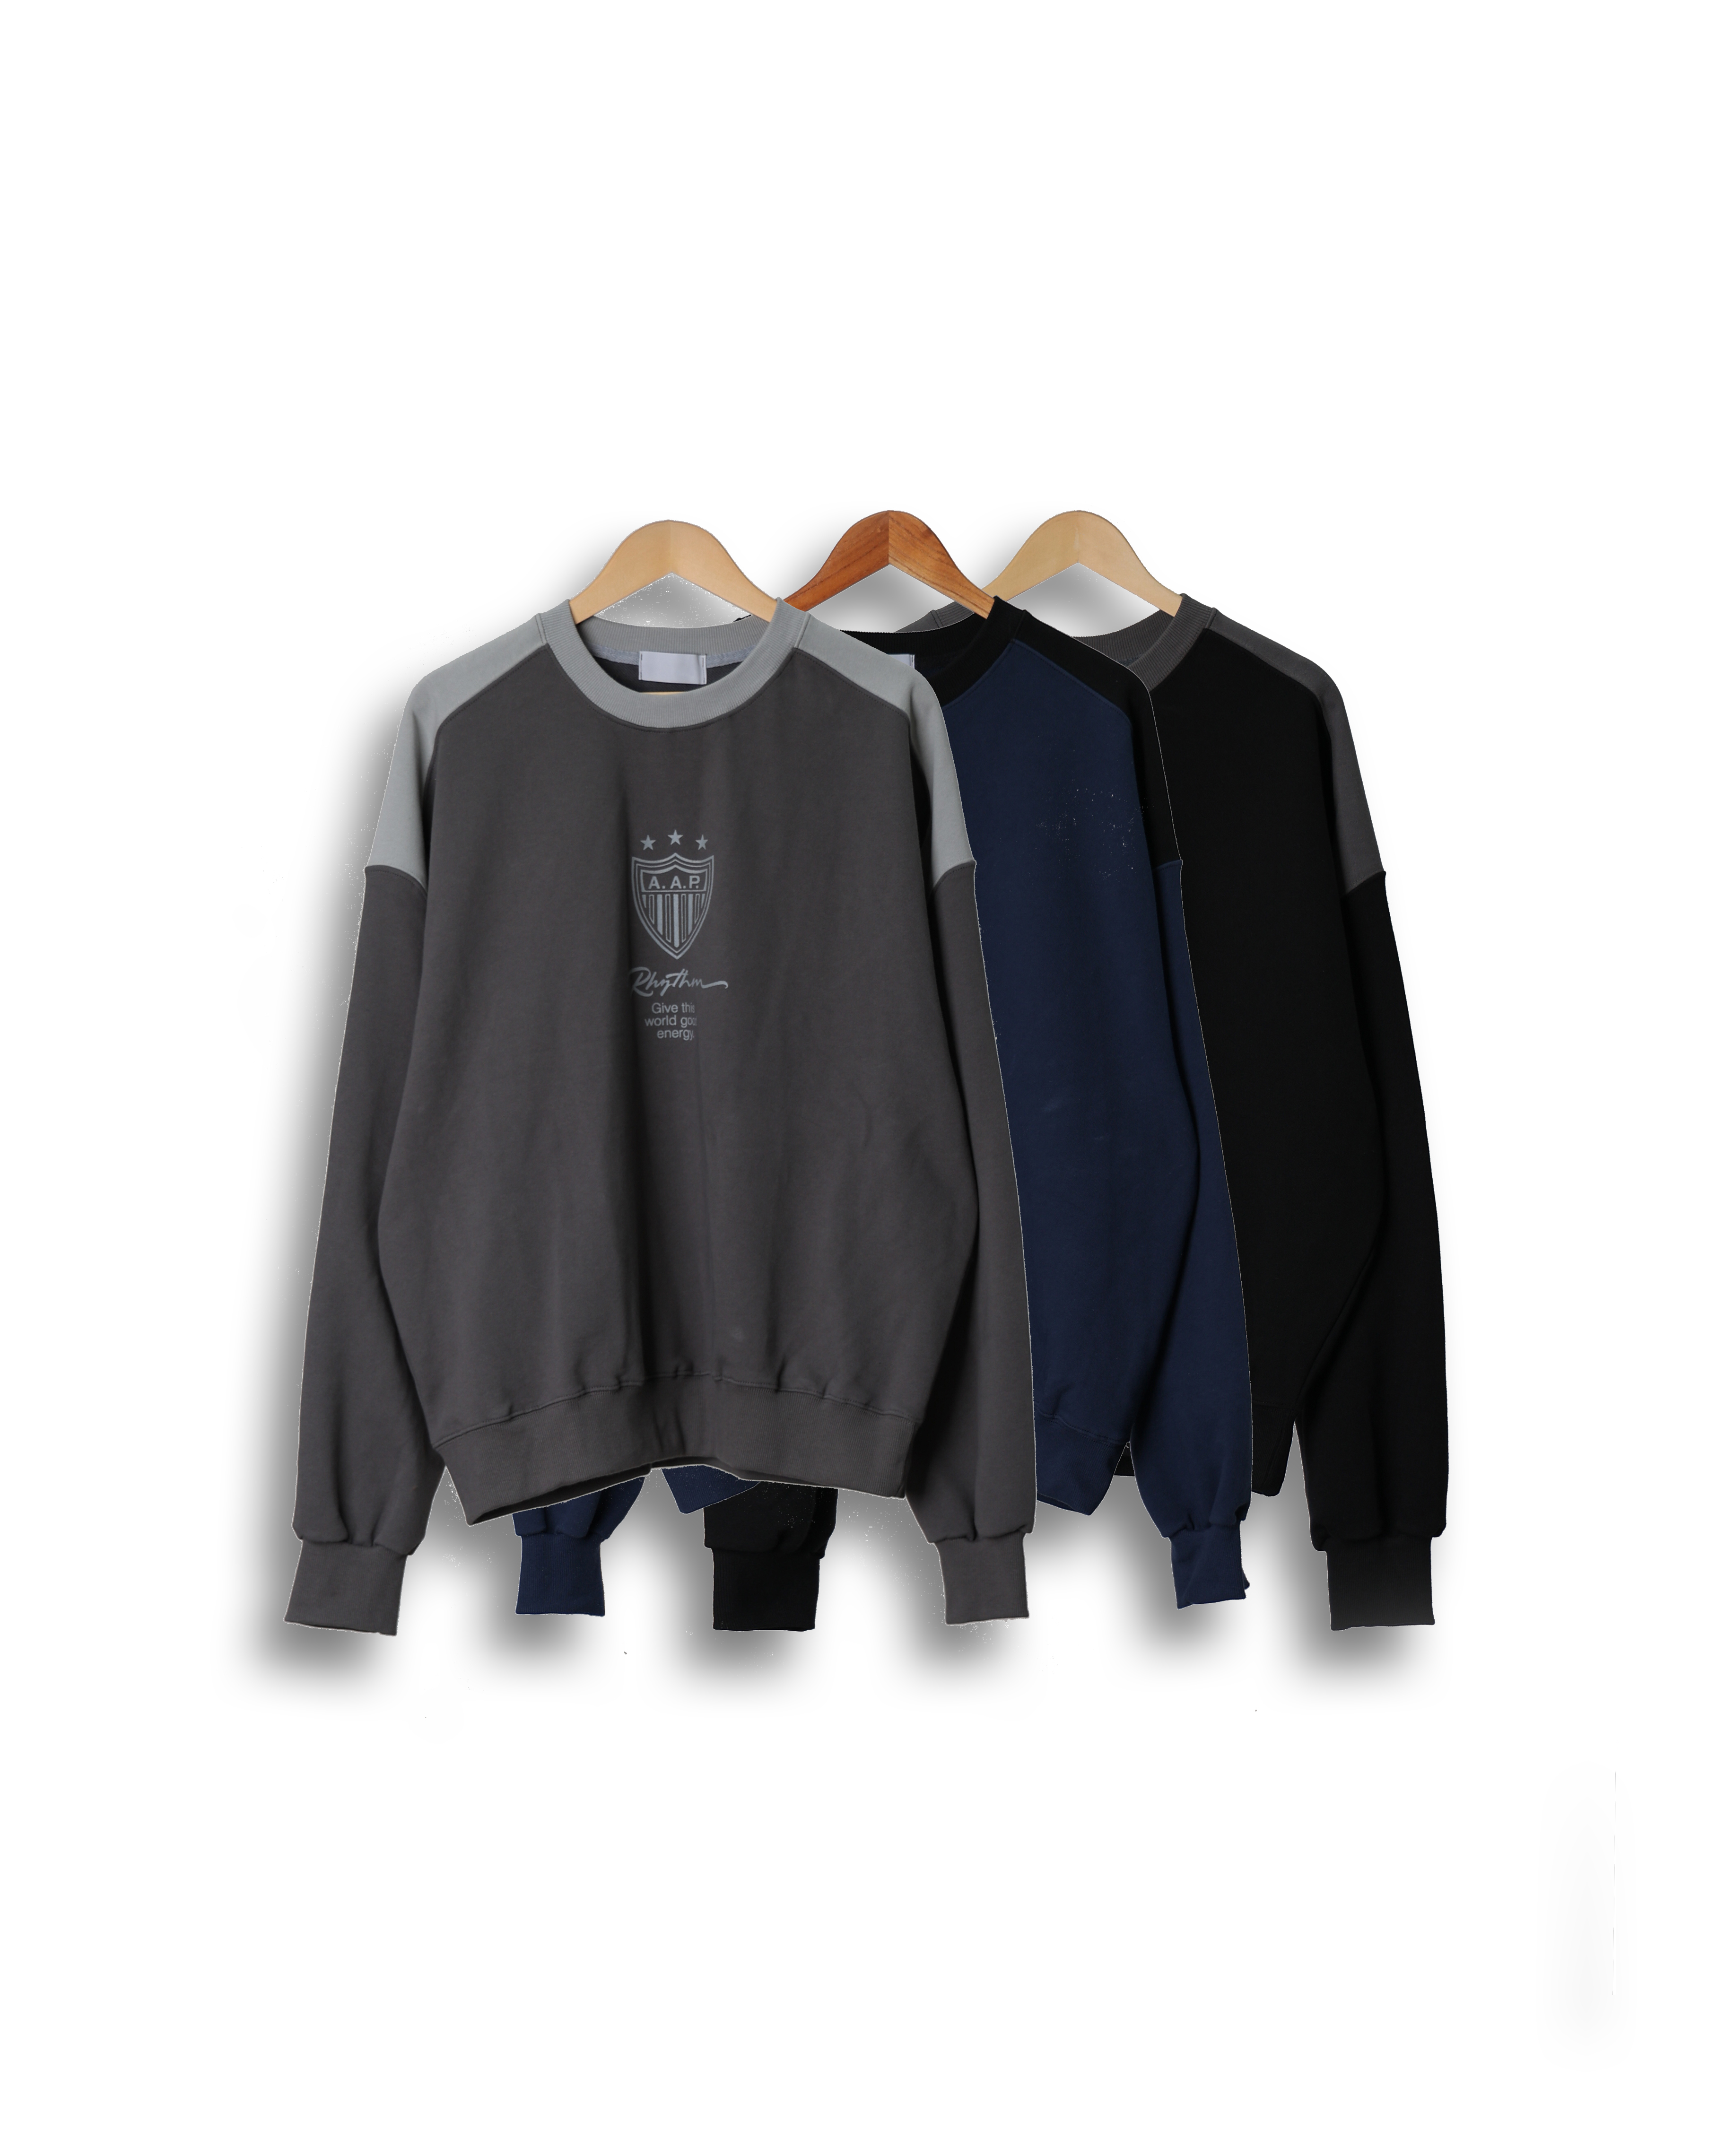 RUMO A.A.P Color Pattern Sweat Shirts (Black/Navy/Charcoal)